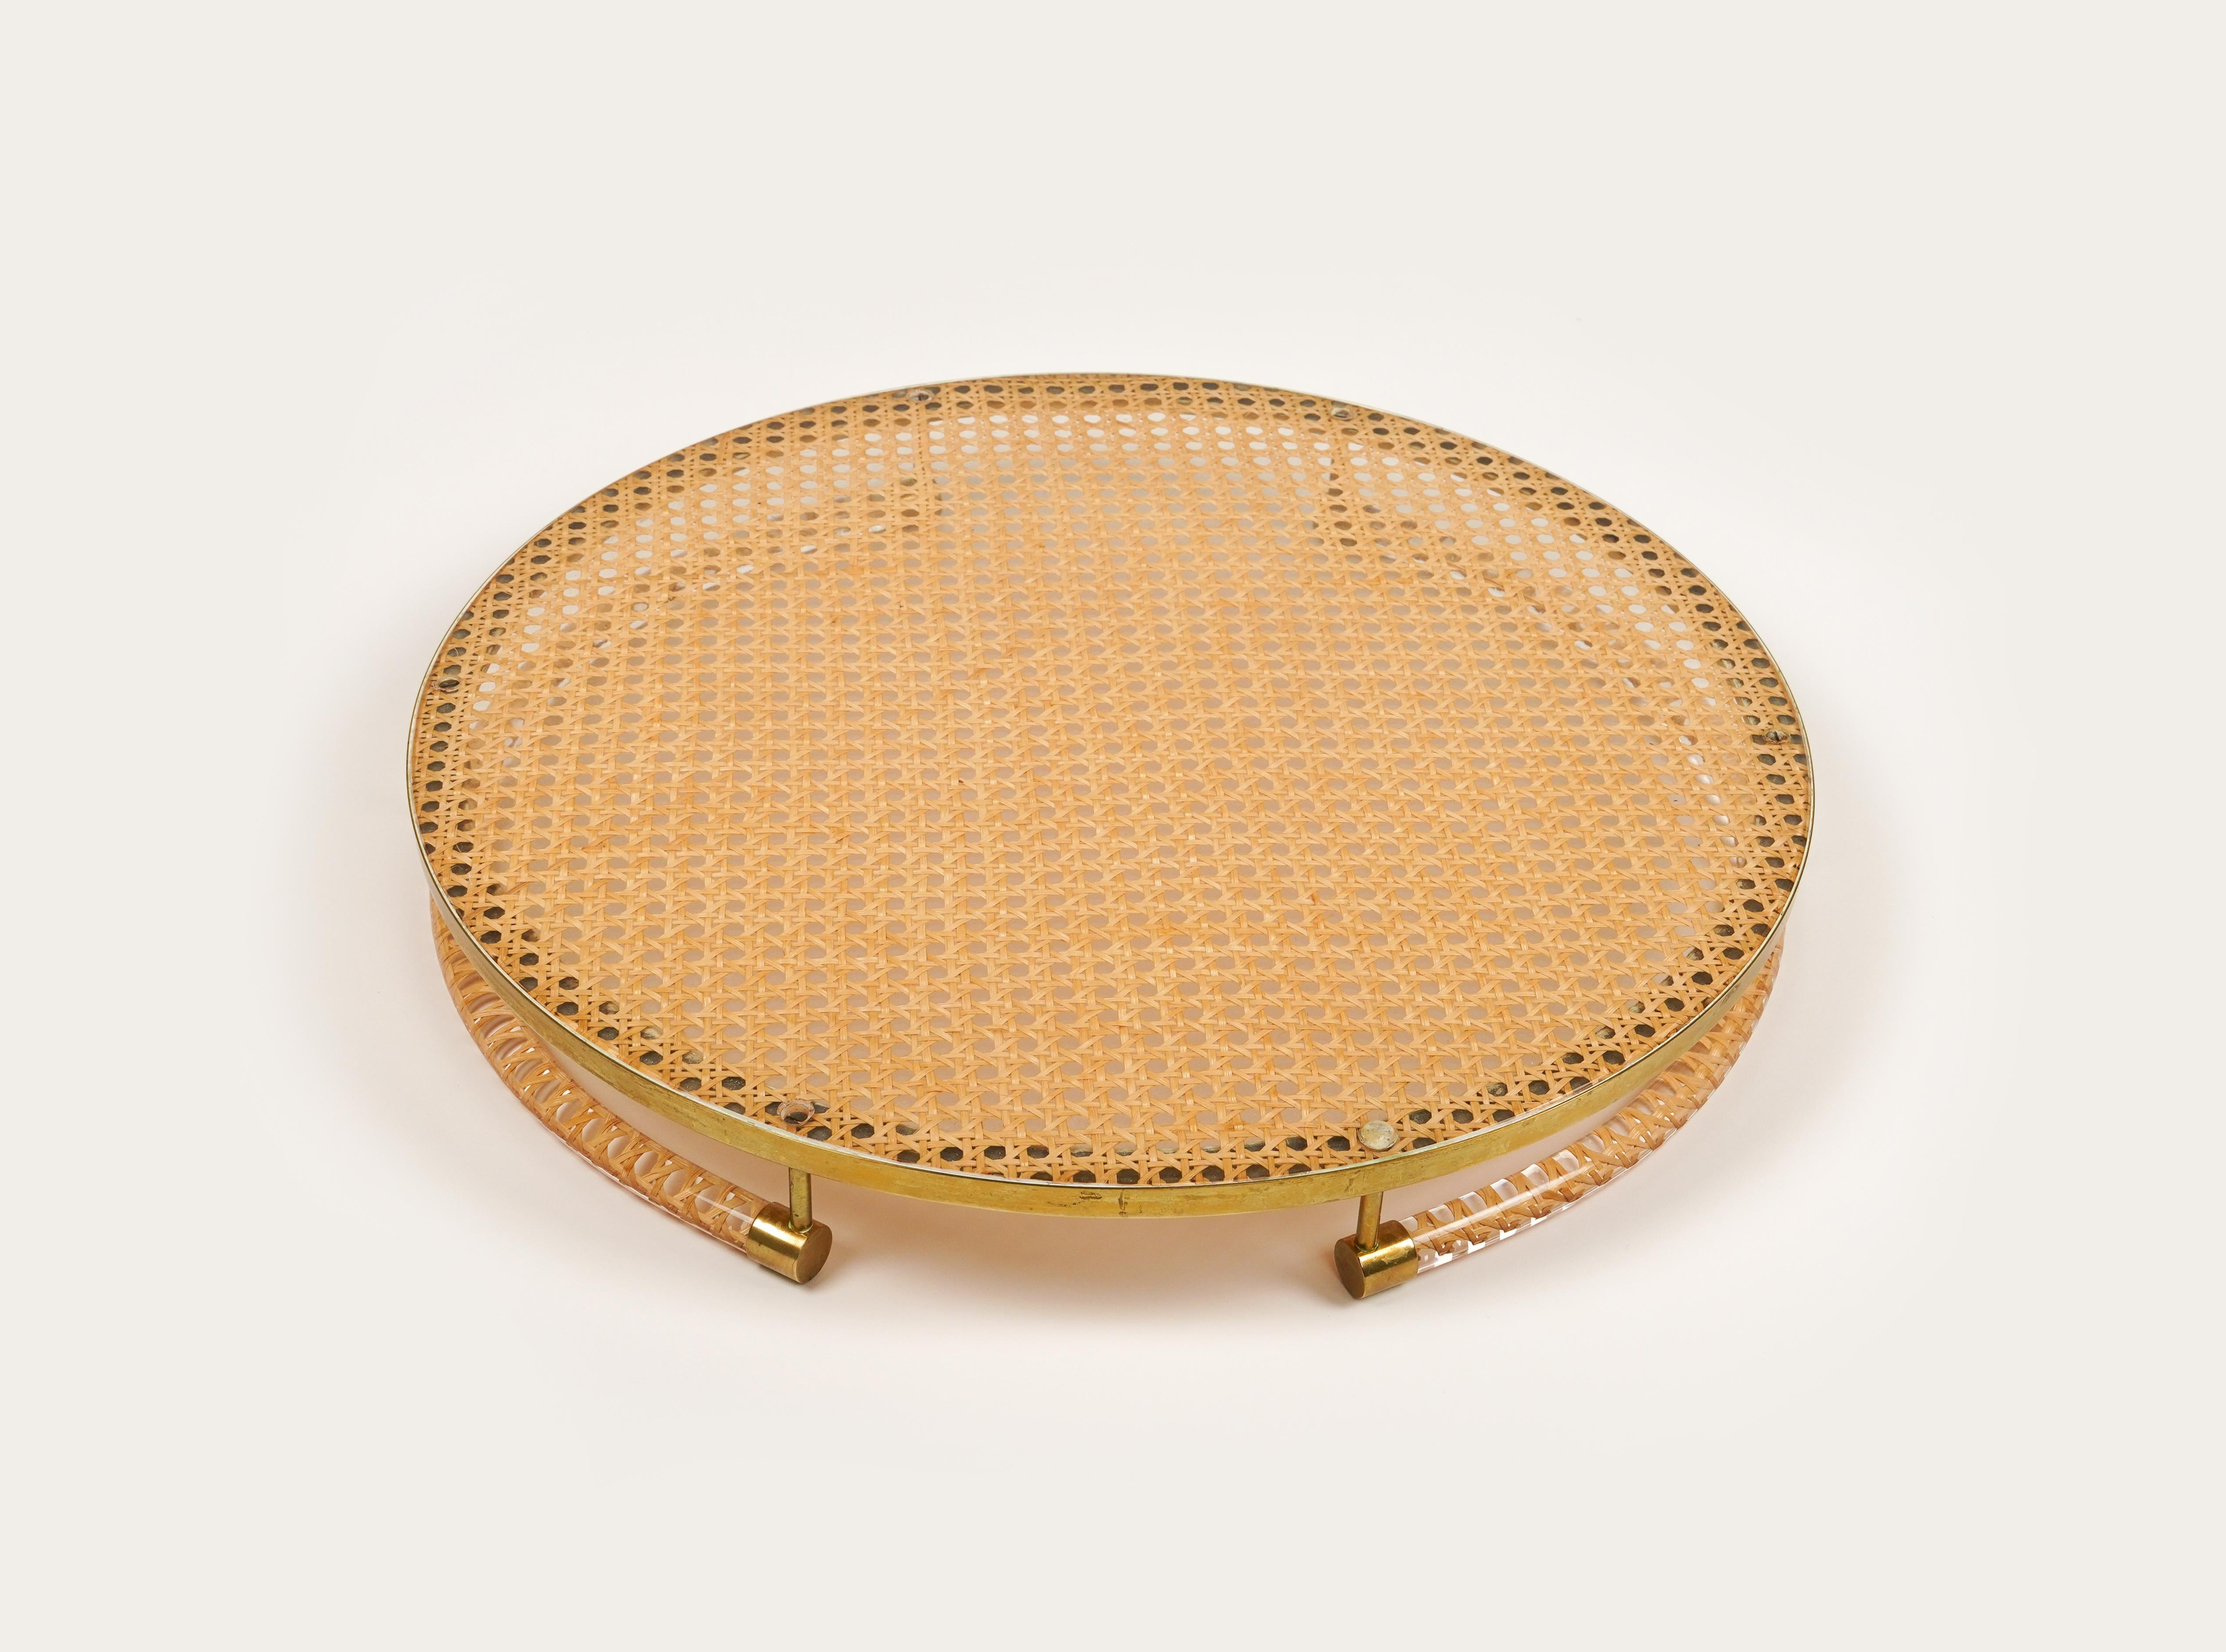 Round Serving Tray in Lucite, Rattan and Brass Christian Dior Style, Italy 1970s For Sale 6